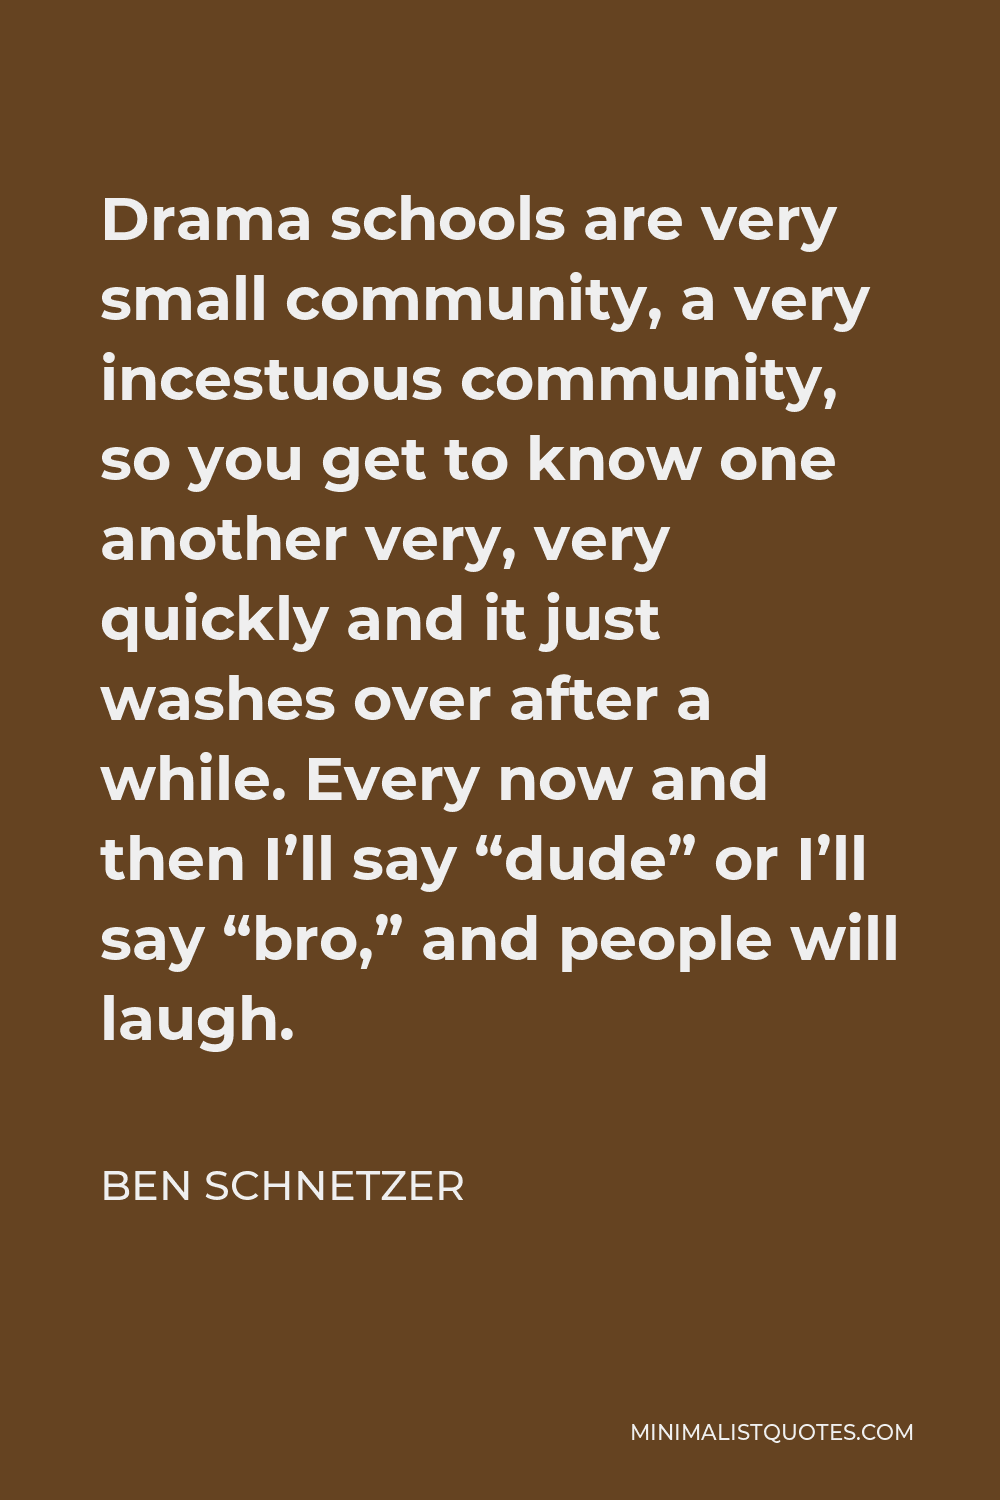 Ben Schnetzer Quote - Drama schools are very small community, a very incestuous community, so you get to know one another very, very quickly and it just washes over after a while. Every now and then I’ll say “dude” or I’ll say “bro,” and people will laugh.